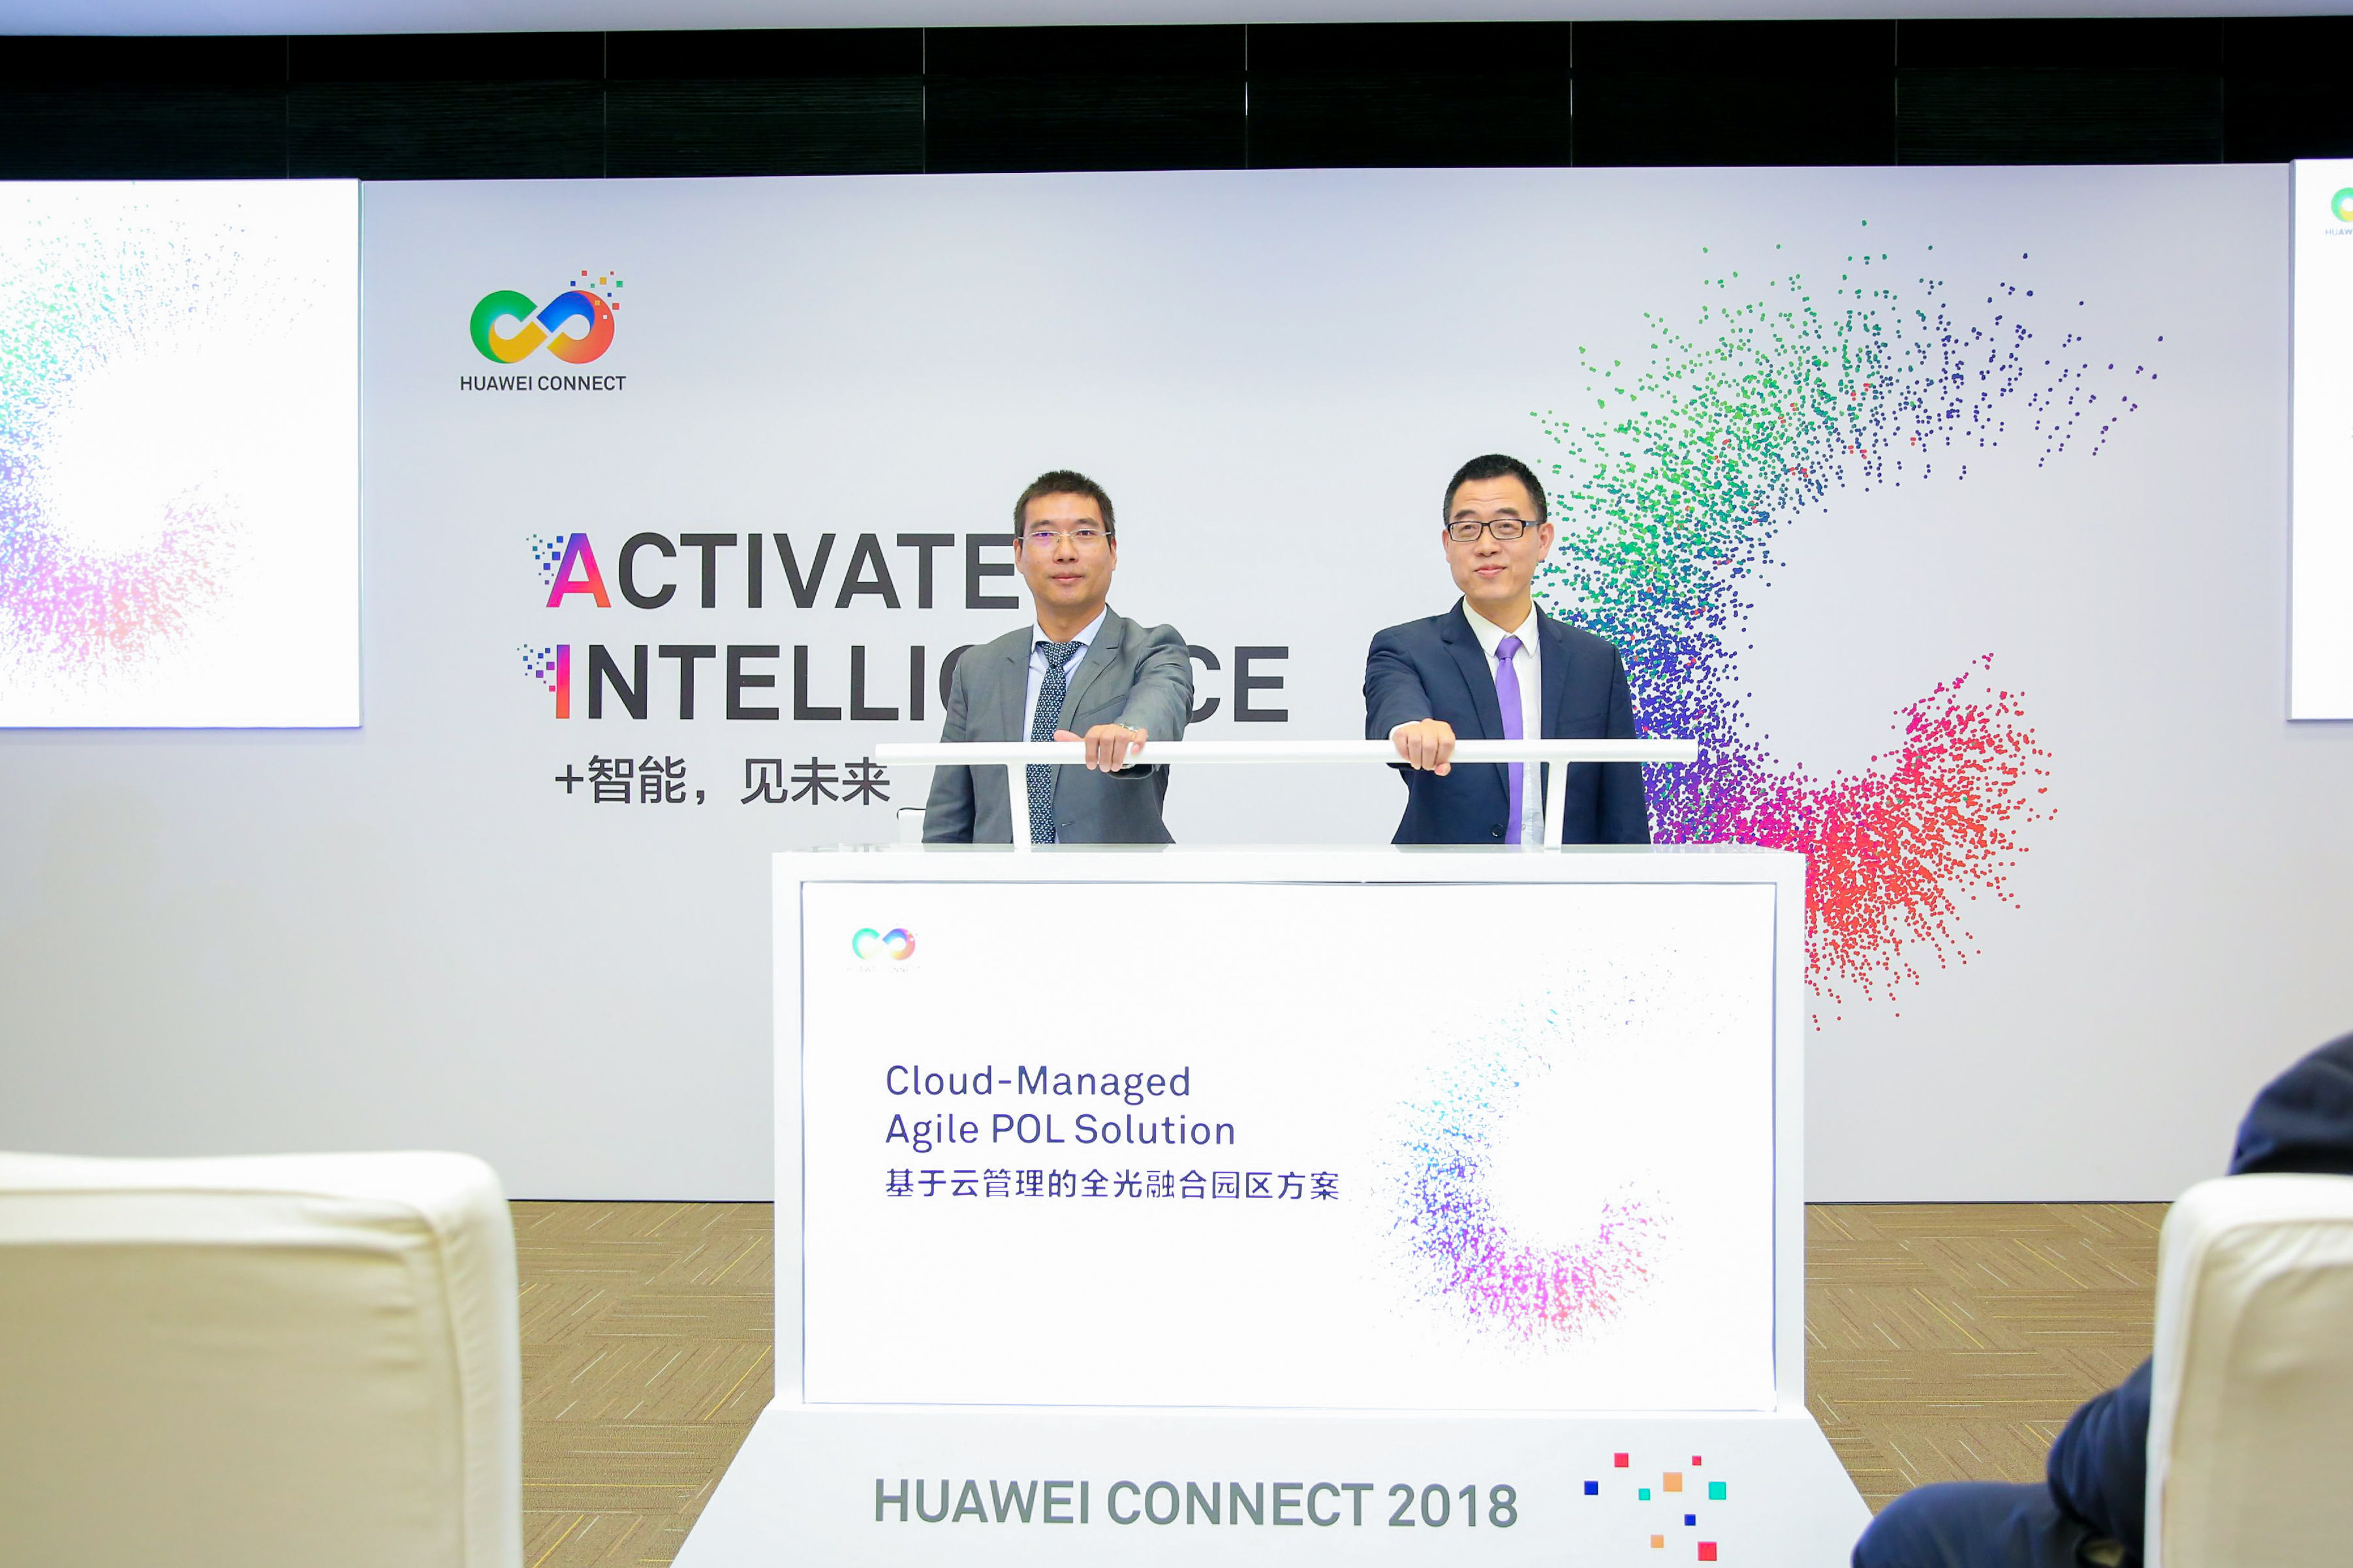 Huawei executives launch the industry's first Cloud-Managed Agile POL Solution at HUAWEI CONNECT 2018